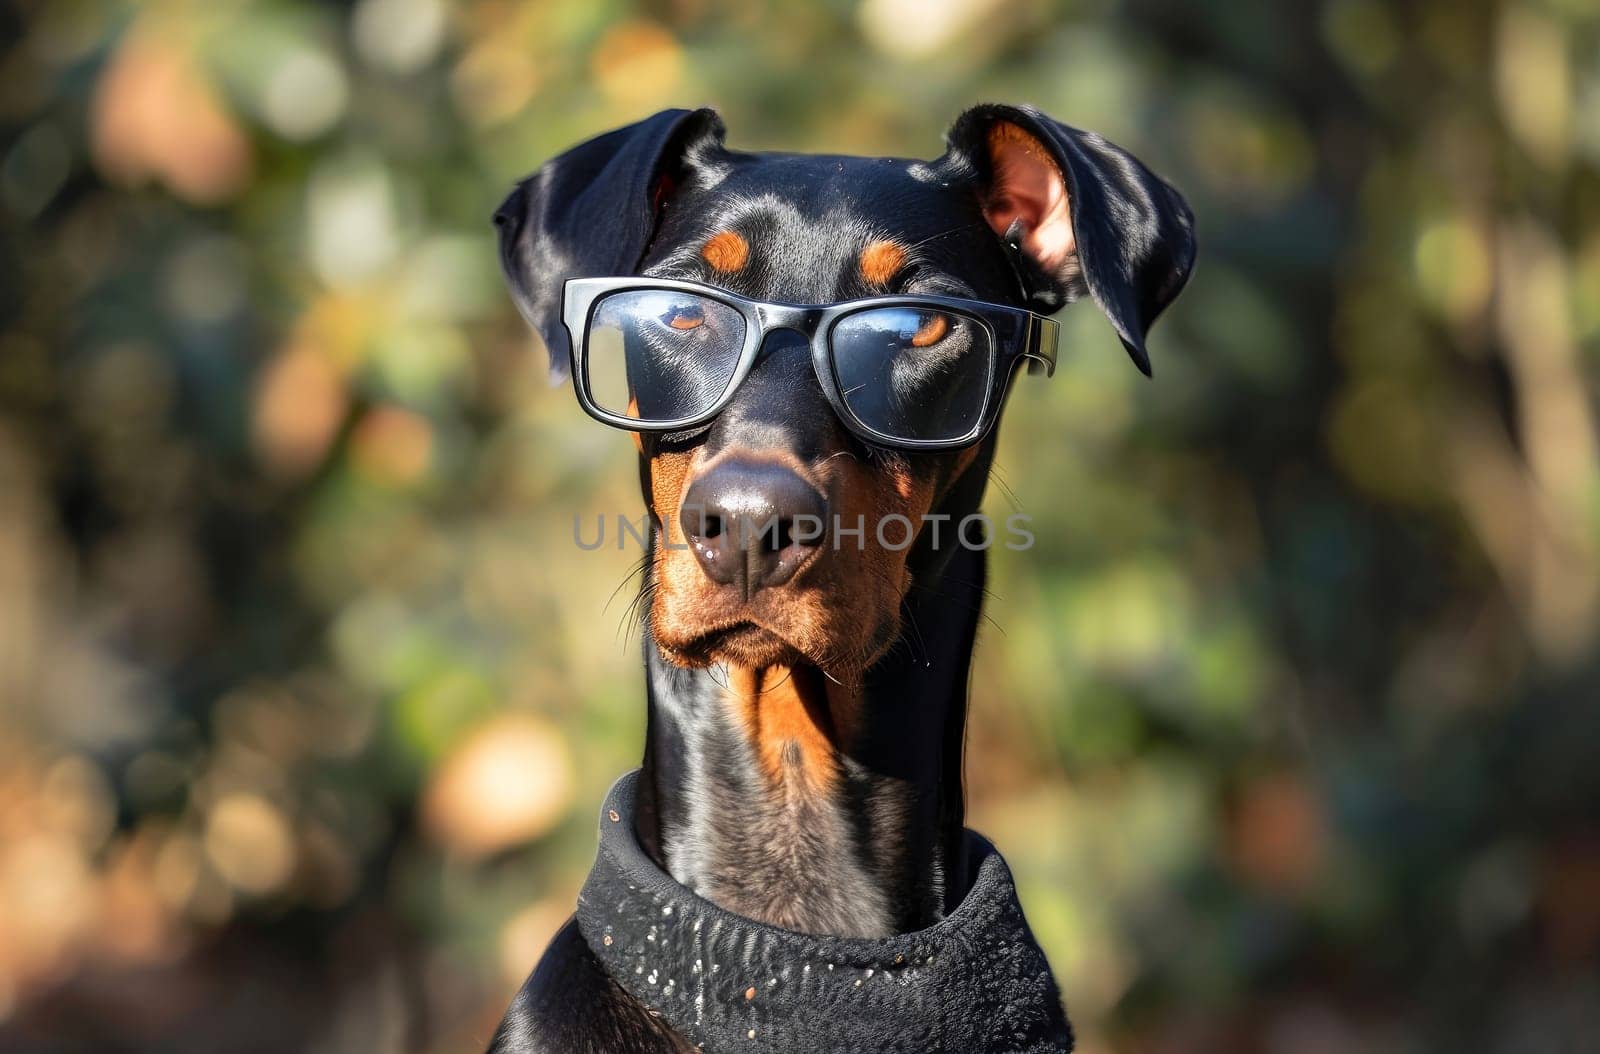 Black and Brown Dog Wearing Sunglasses and Sweater by gcm